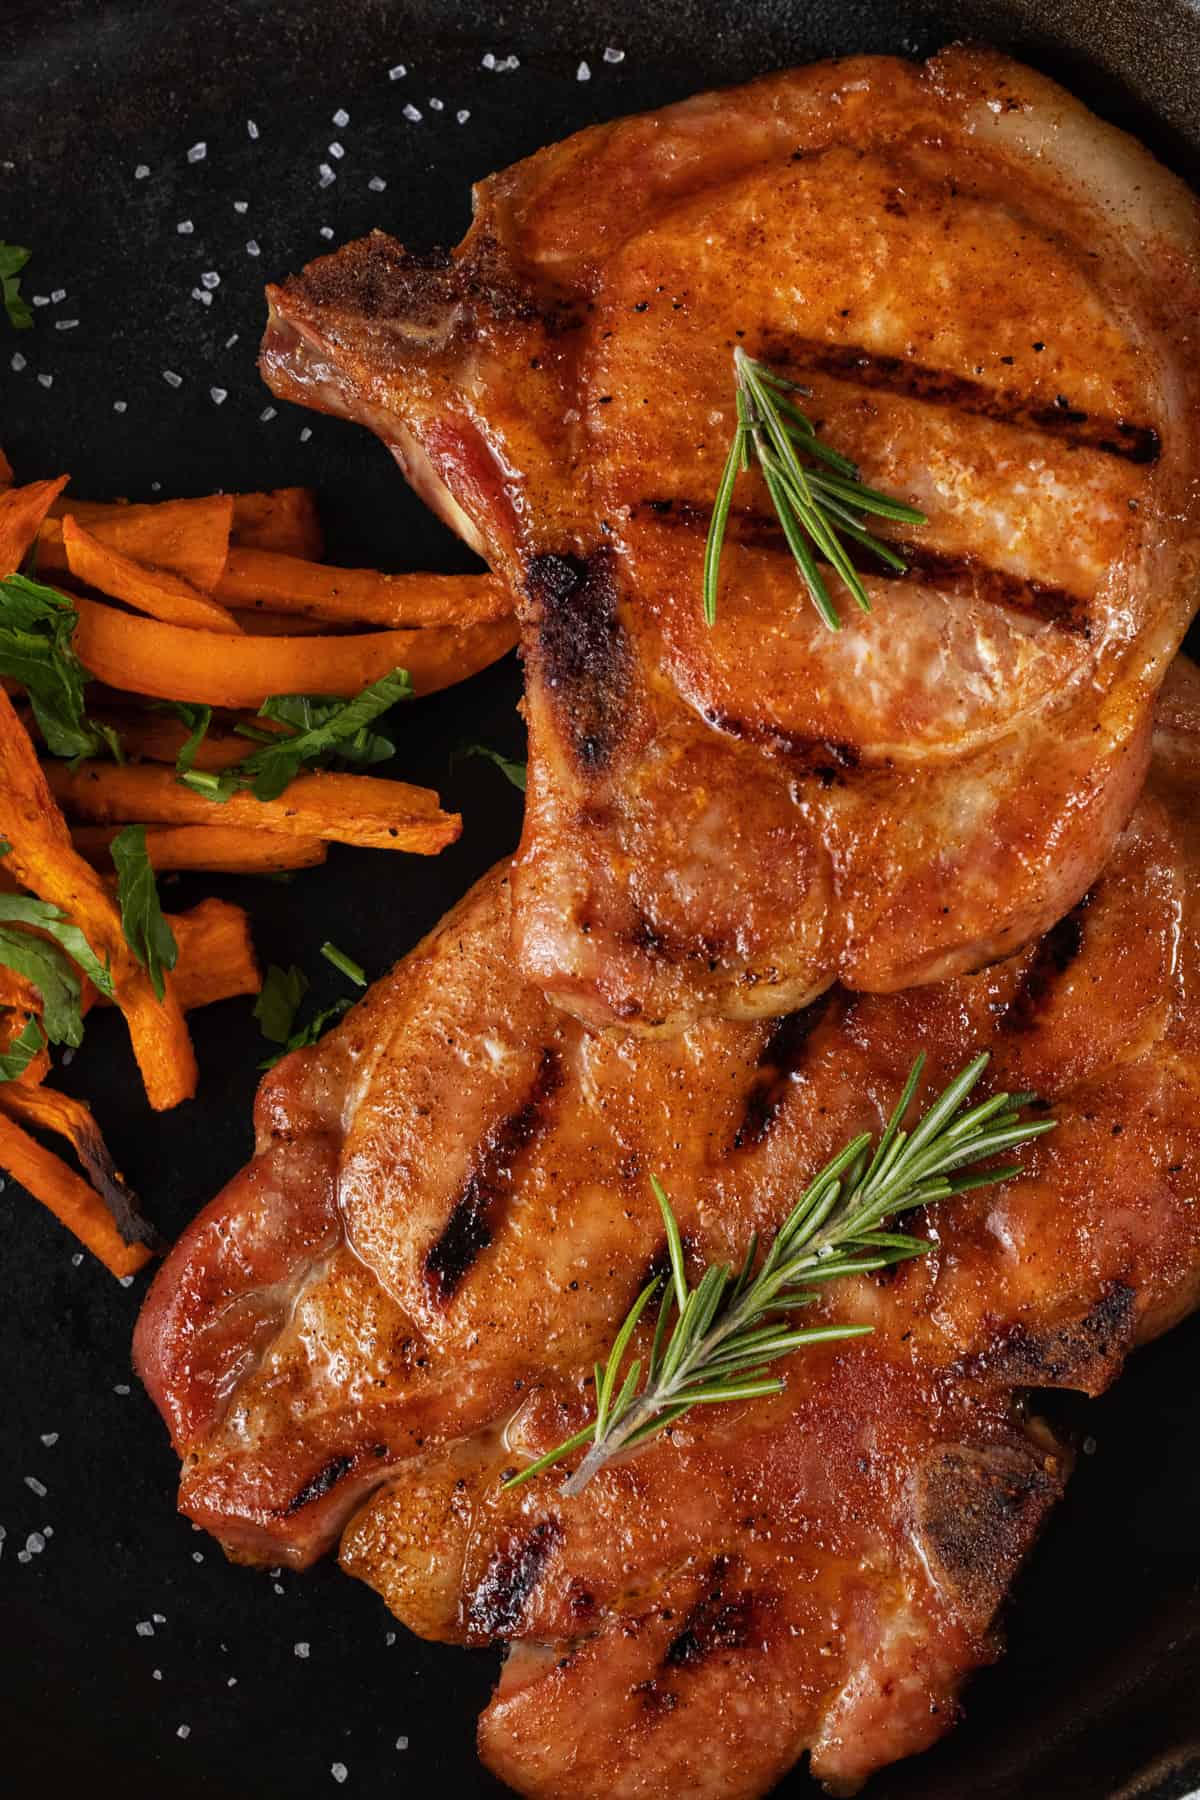 Two grilled pork chops on a black plate with carrots and rosemary garnish